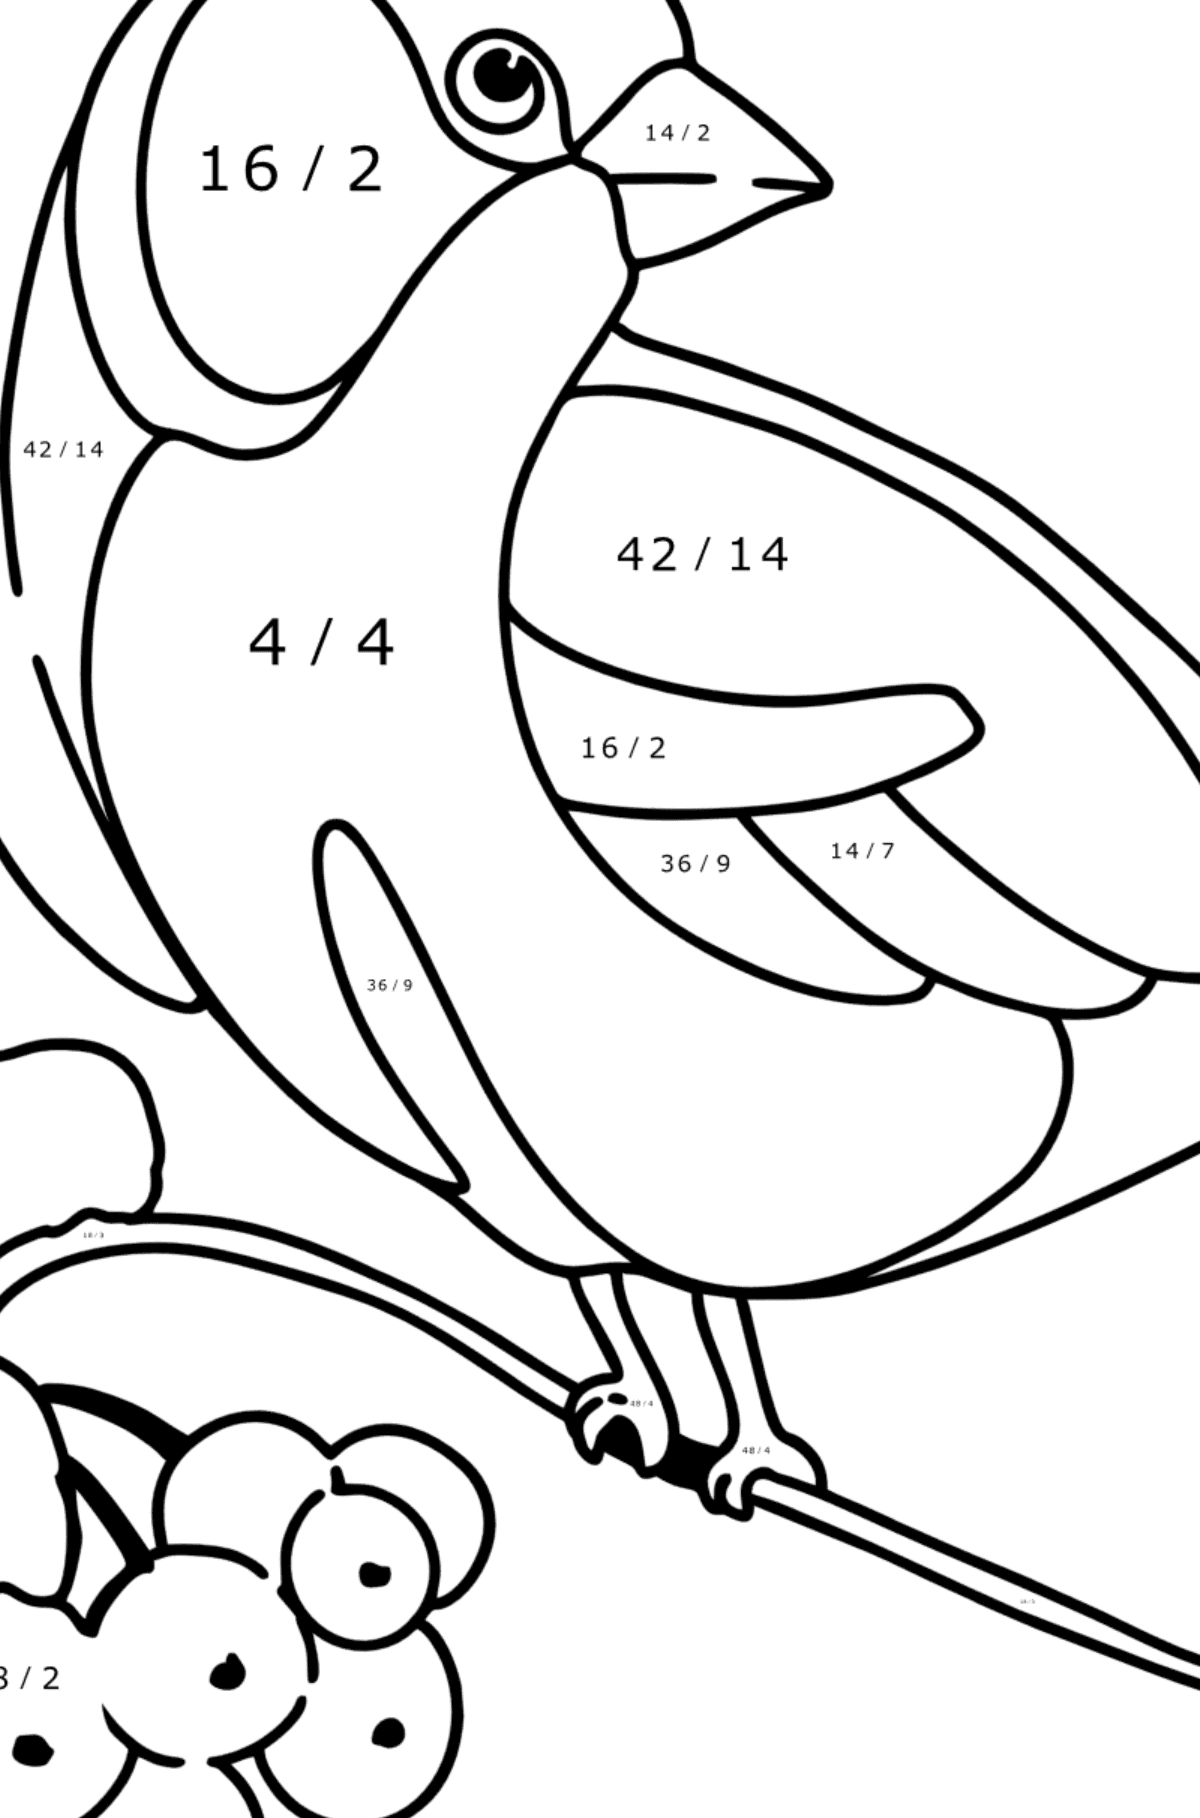 Coloring page - Titmouse on Mountain Ash - Math Coloring - Division for Kids